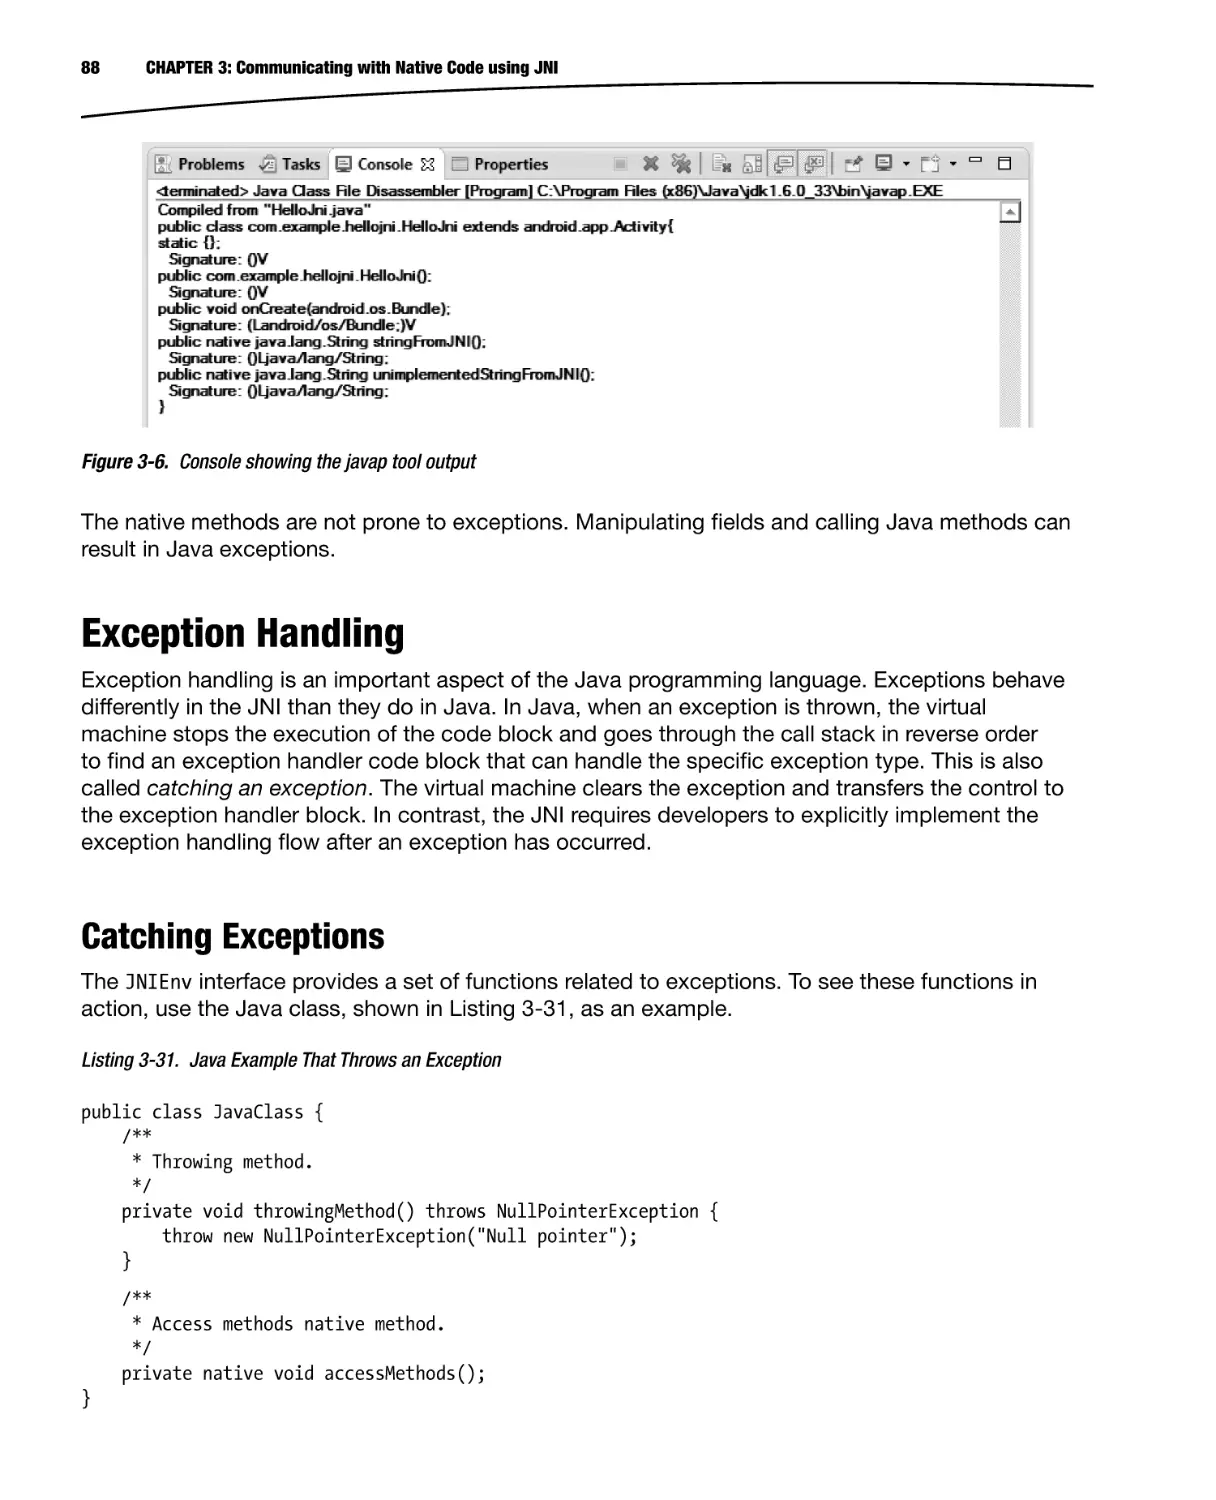 Exception Handling
Catching Exceptions